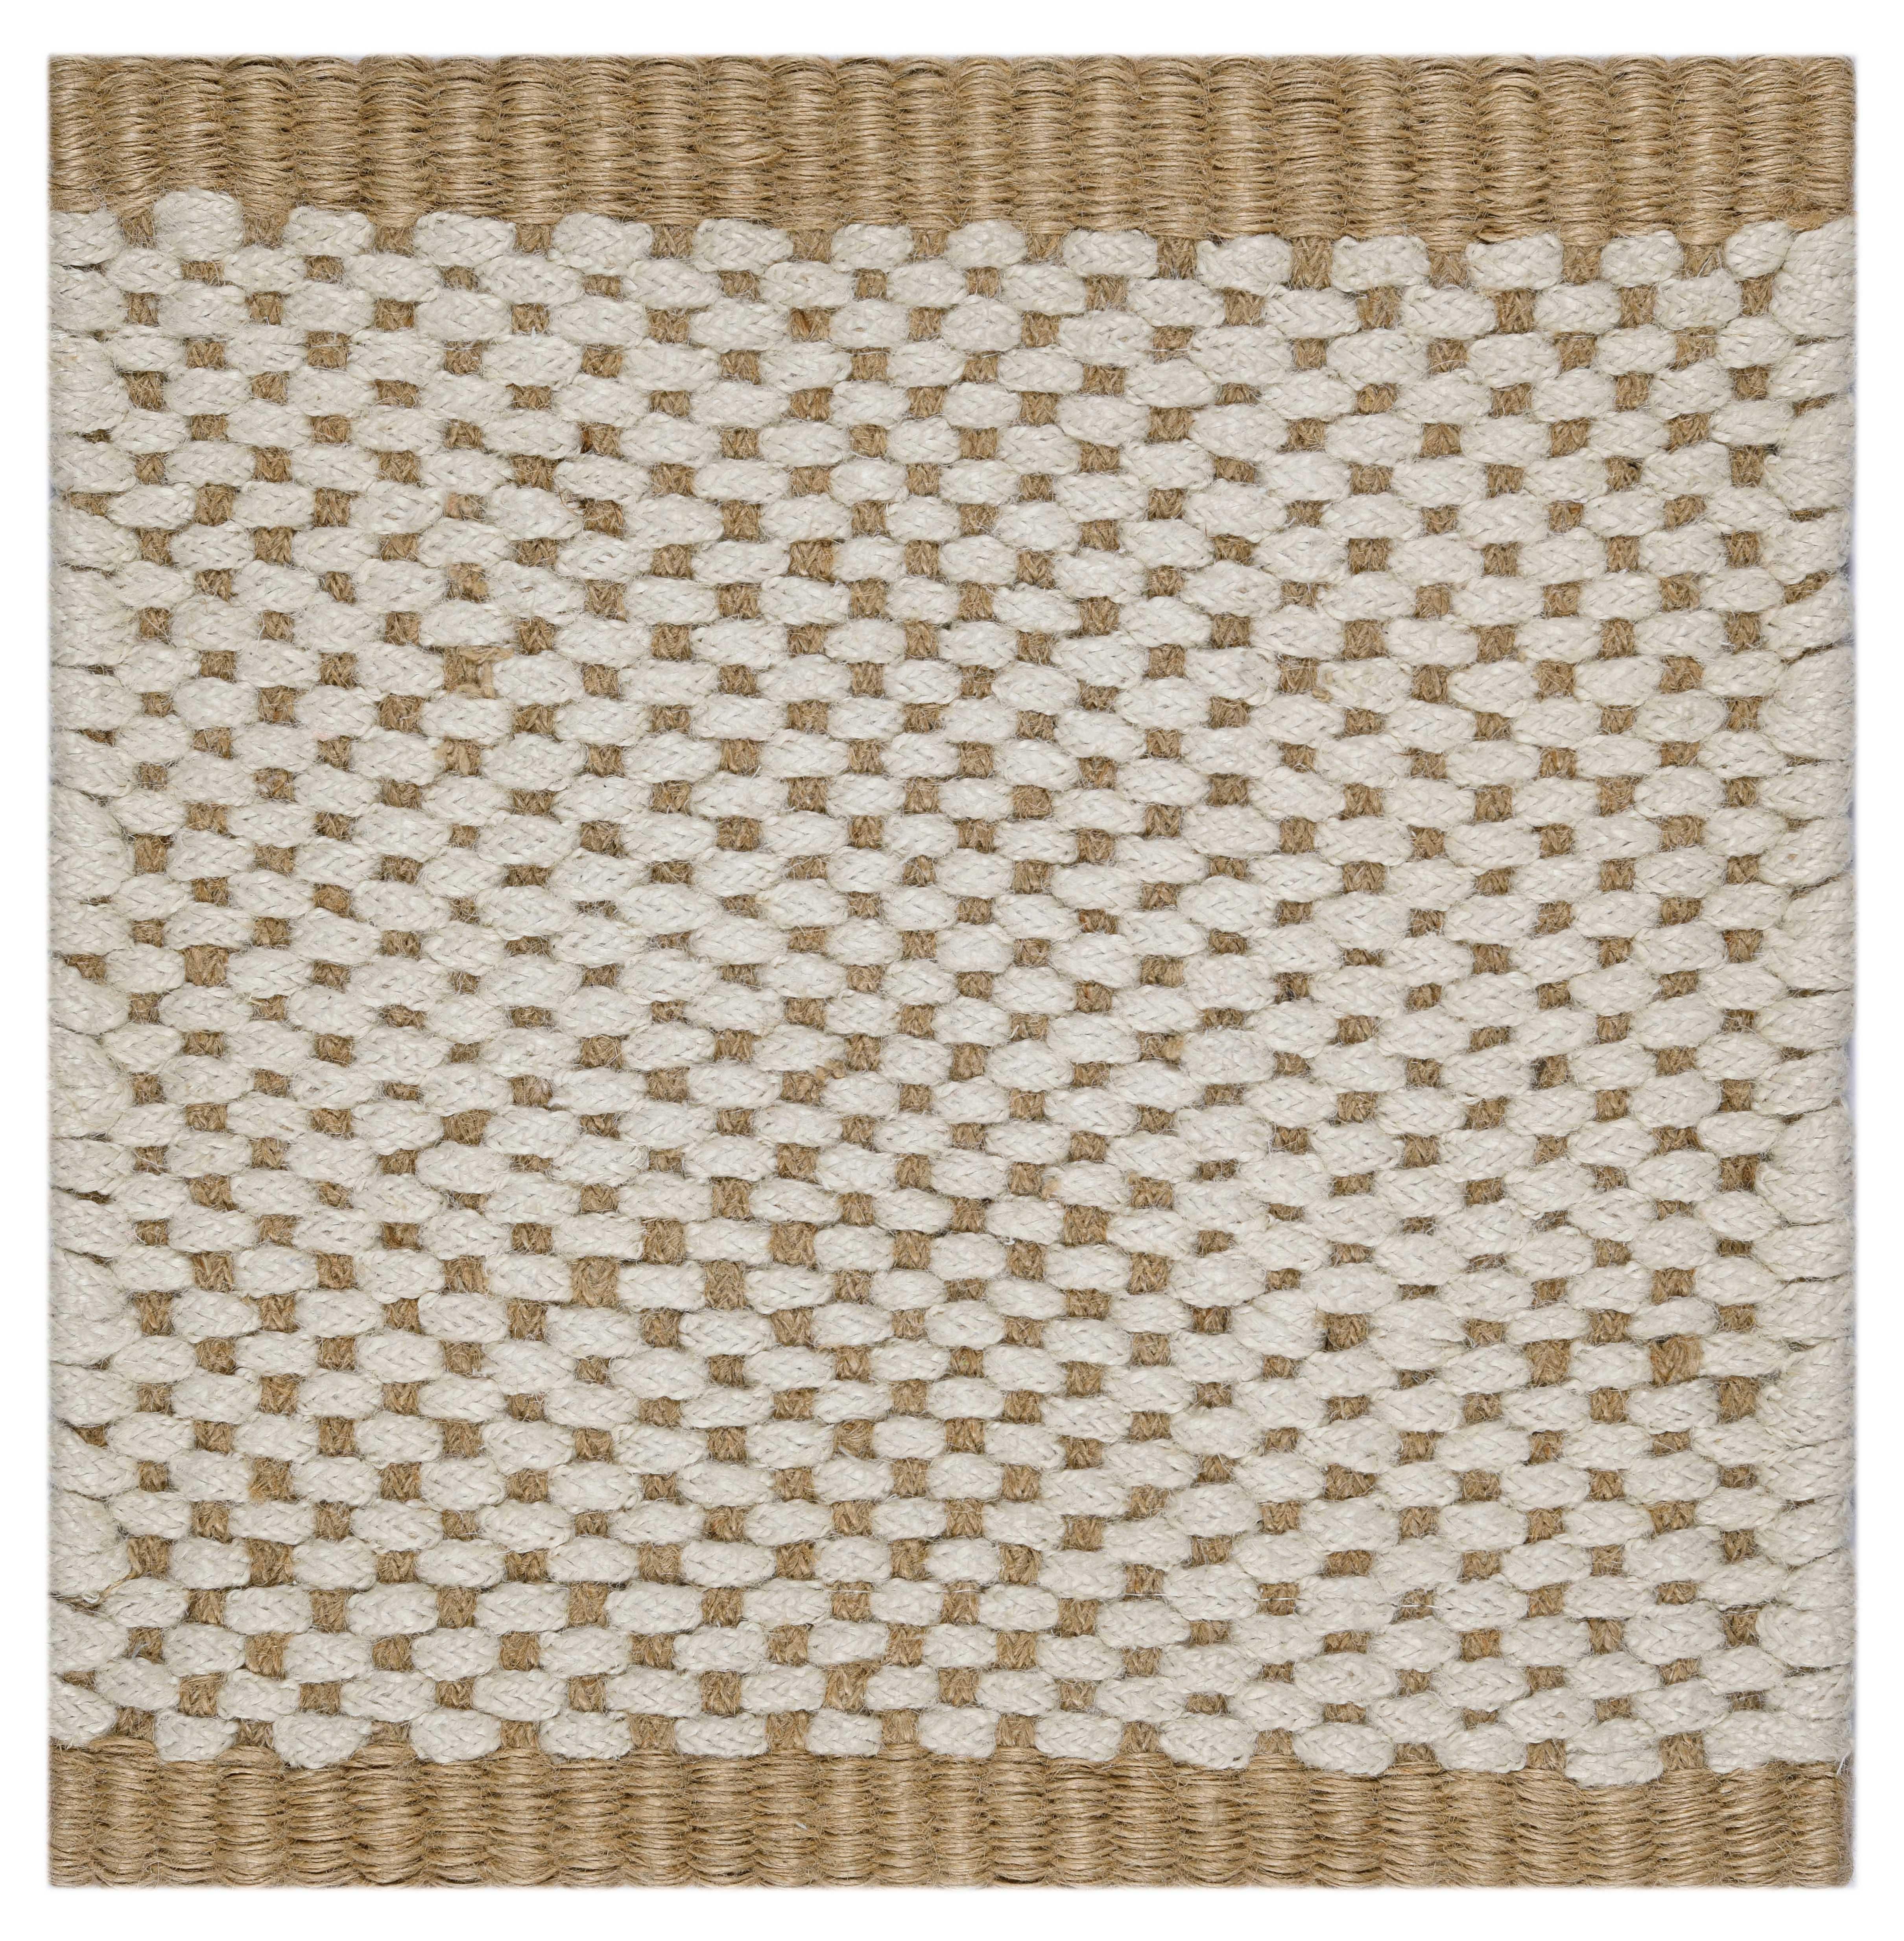 Robur, Ivory, Handwoven Face 100% Jute, 8' x 10' In New Condition For Sale In New York, NY